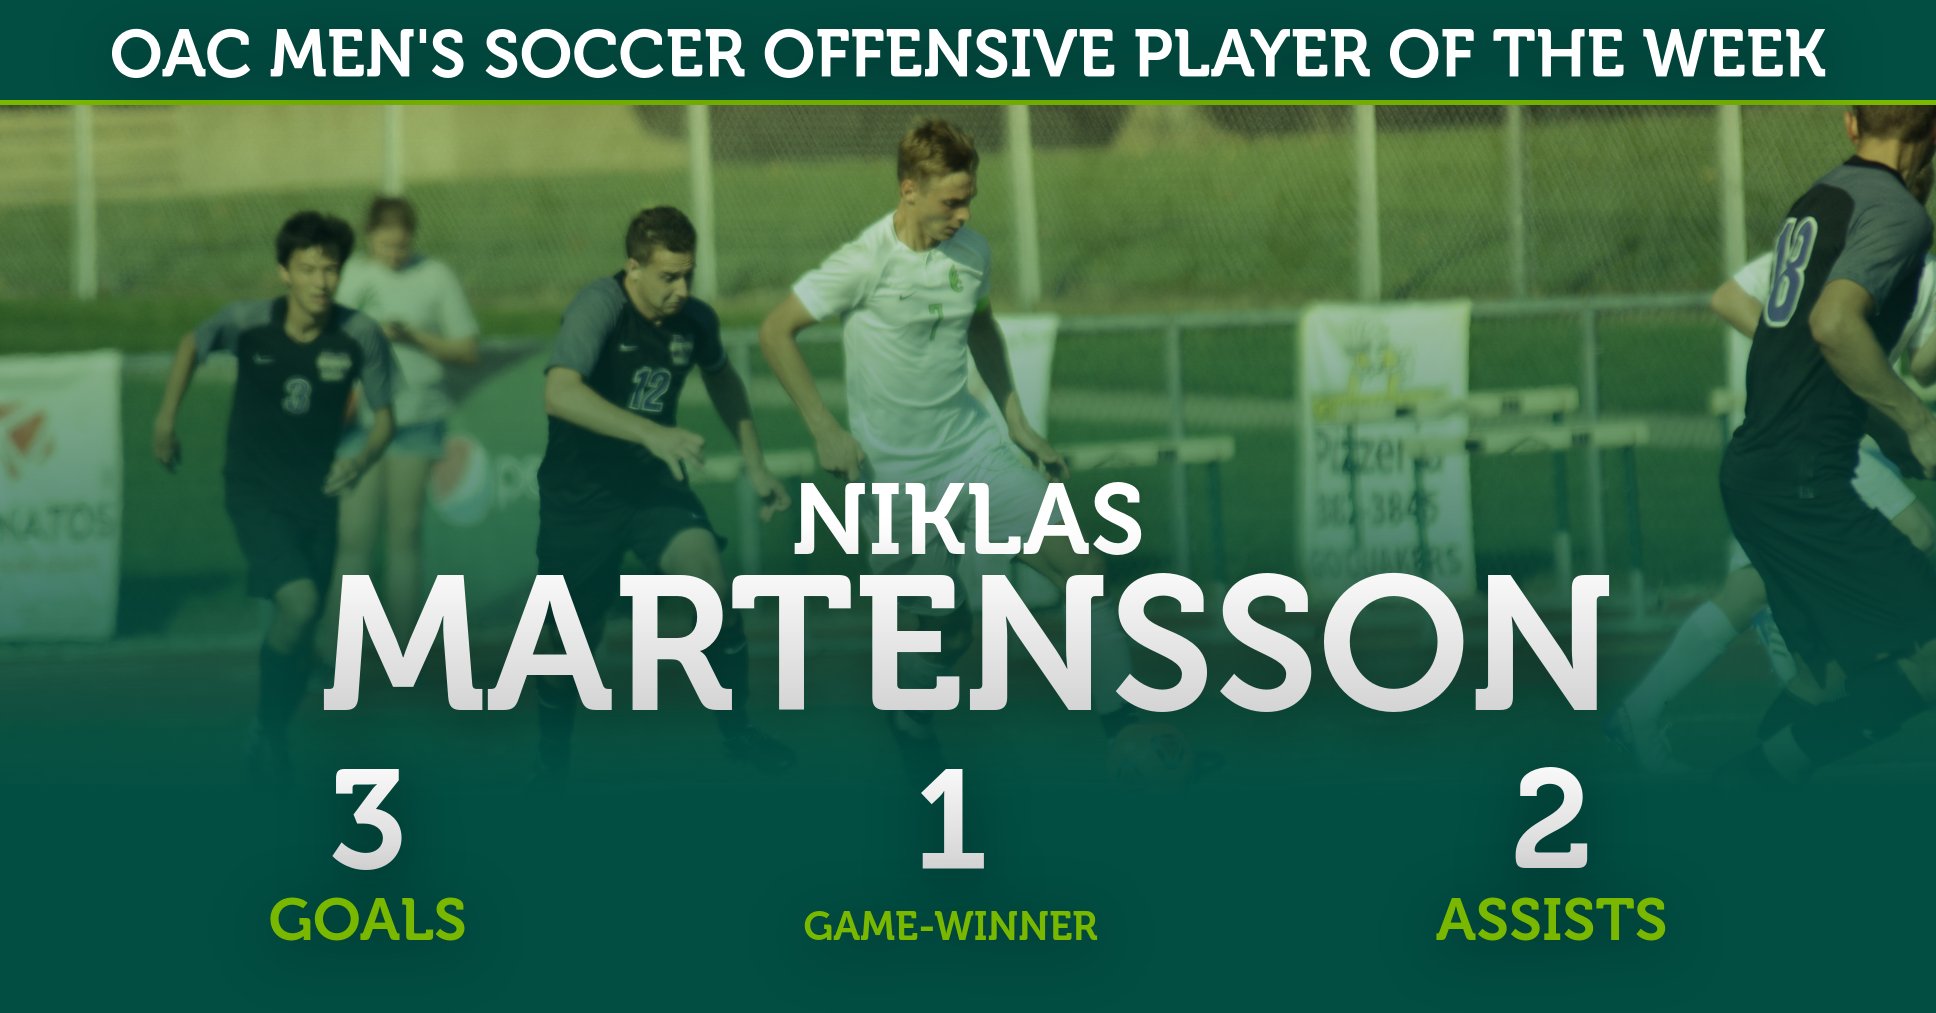 Martensson Garners OAC Men's Soccer Offensive Player of the Week Honors